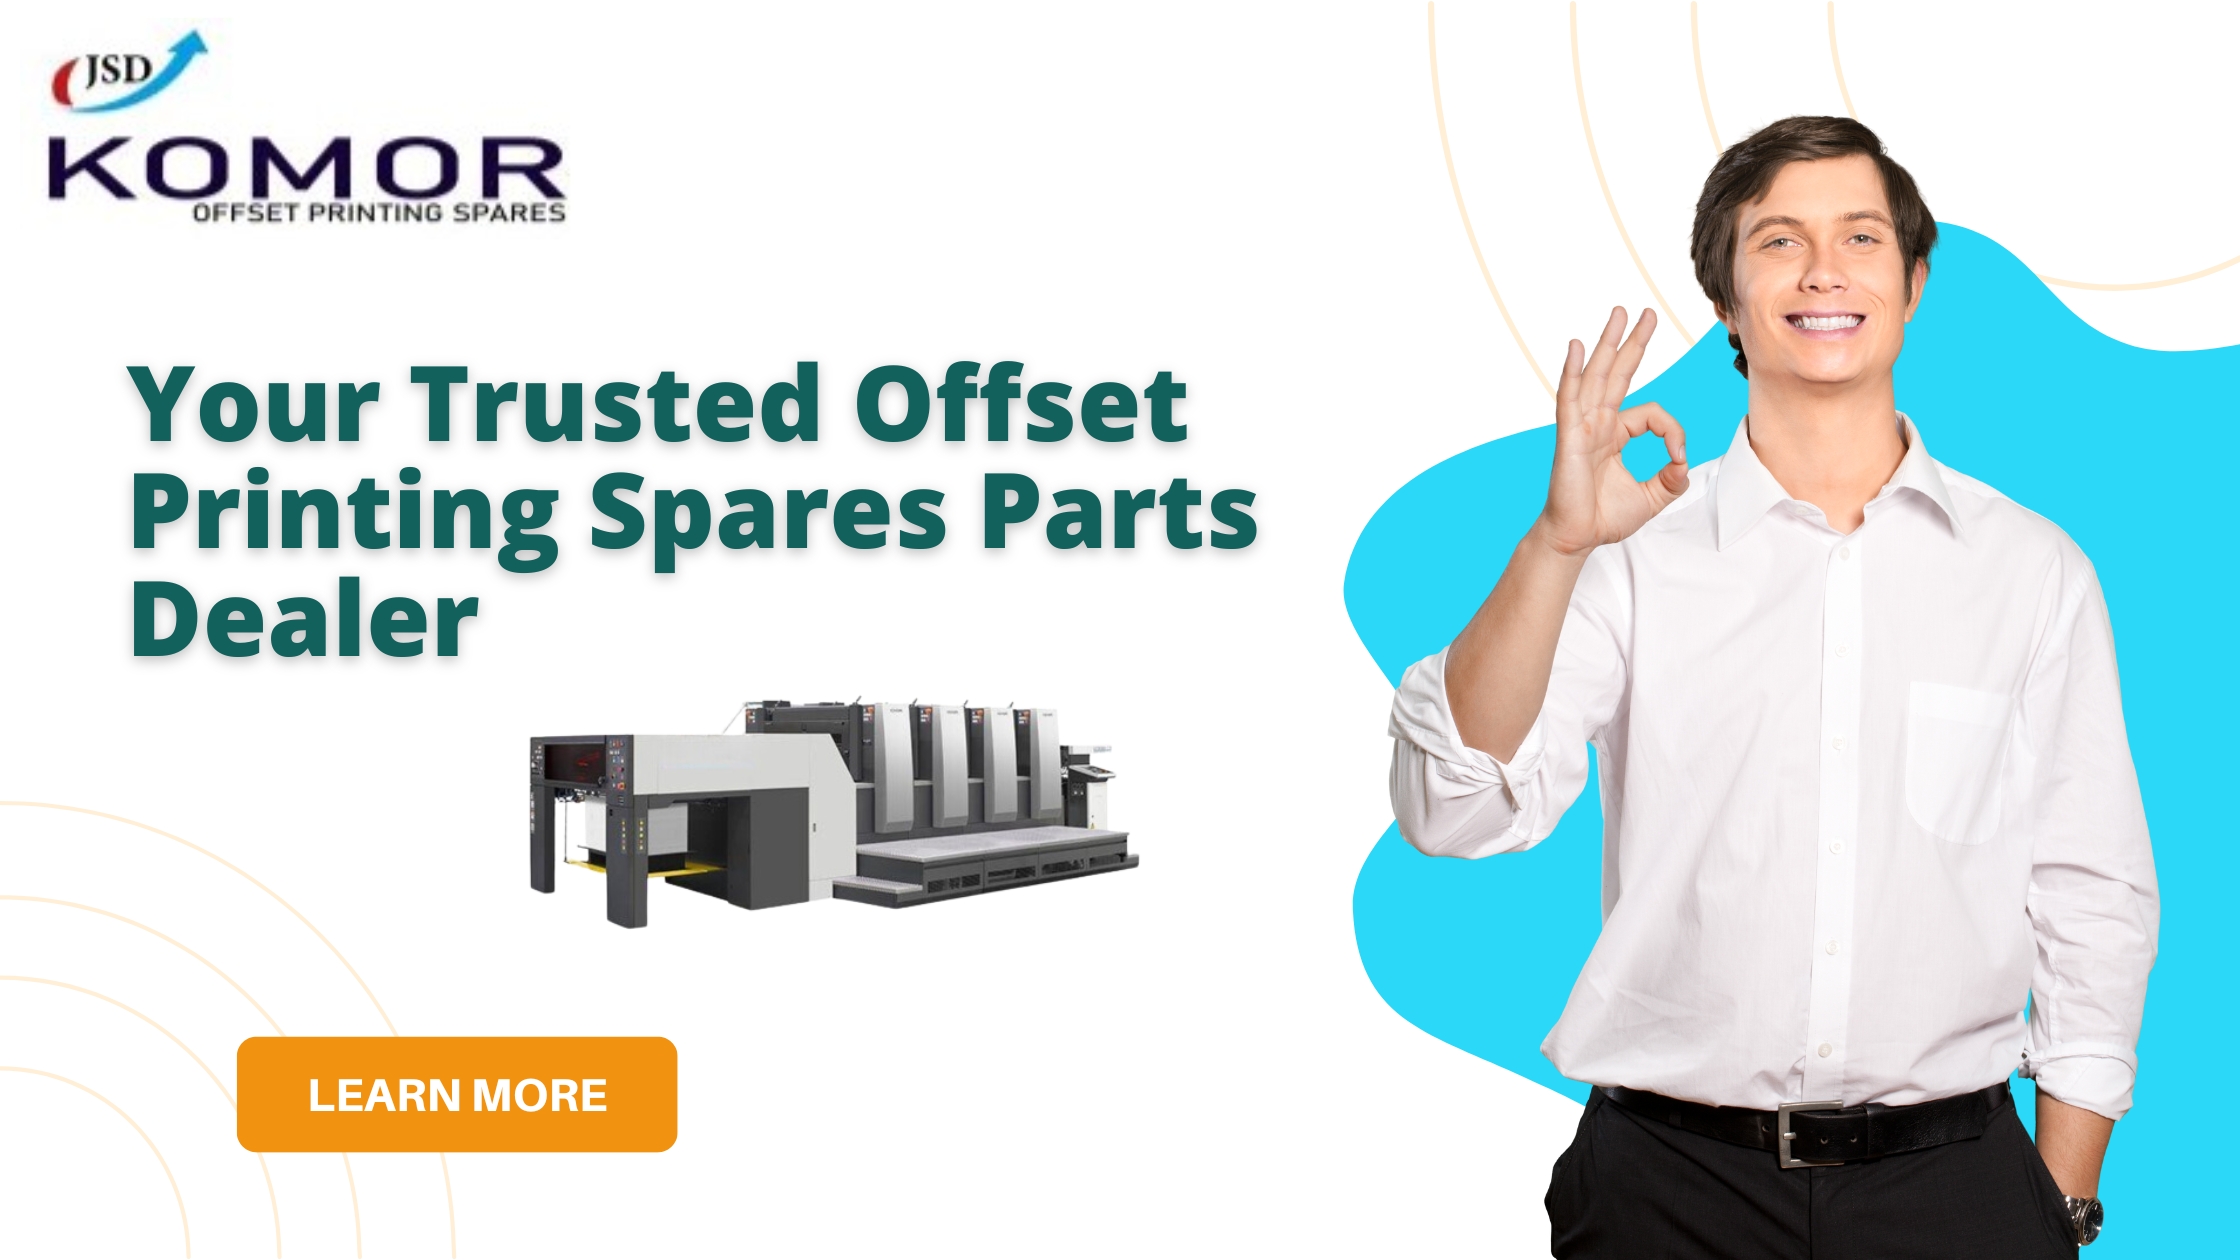 Your Trusted Offset Printing Spares Parts Dealer